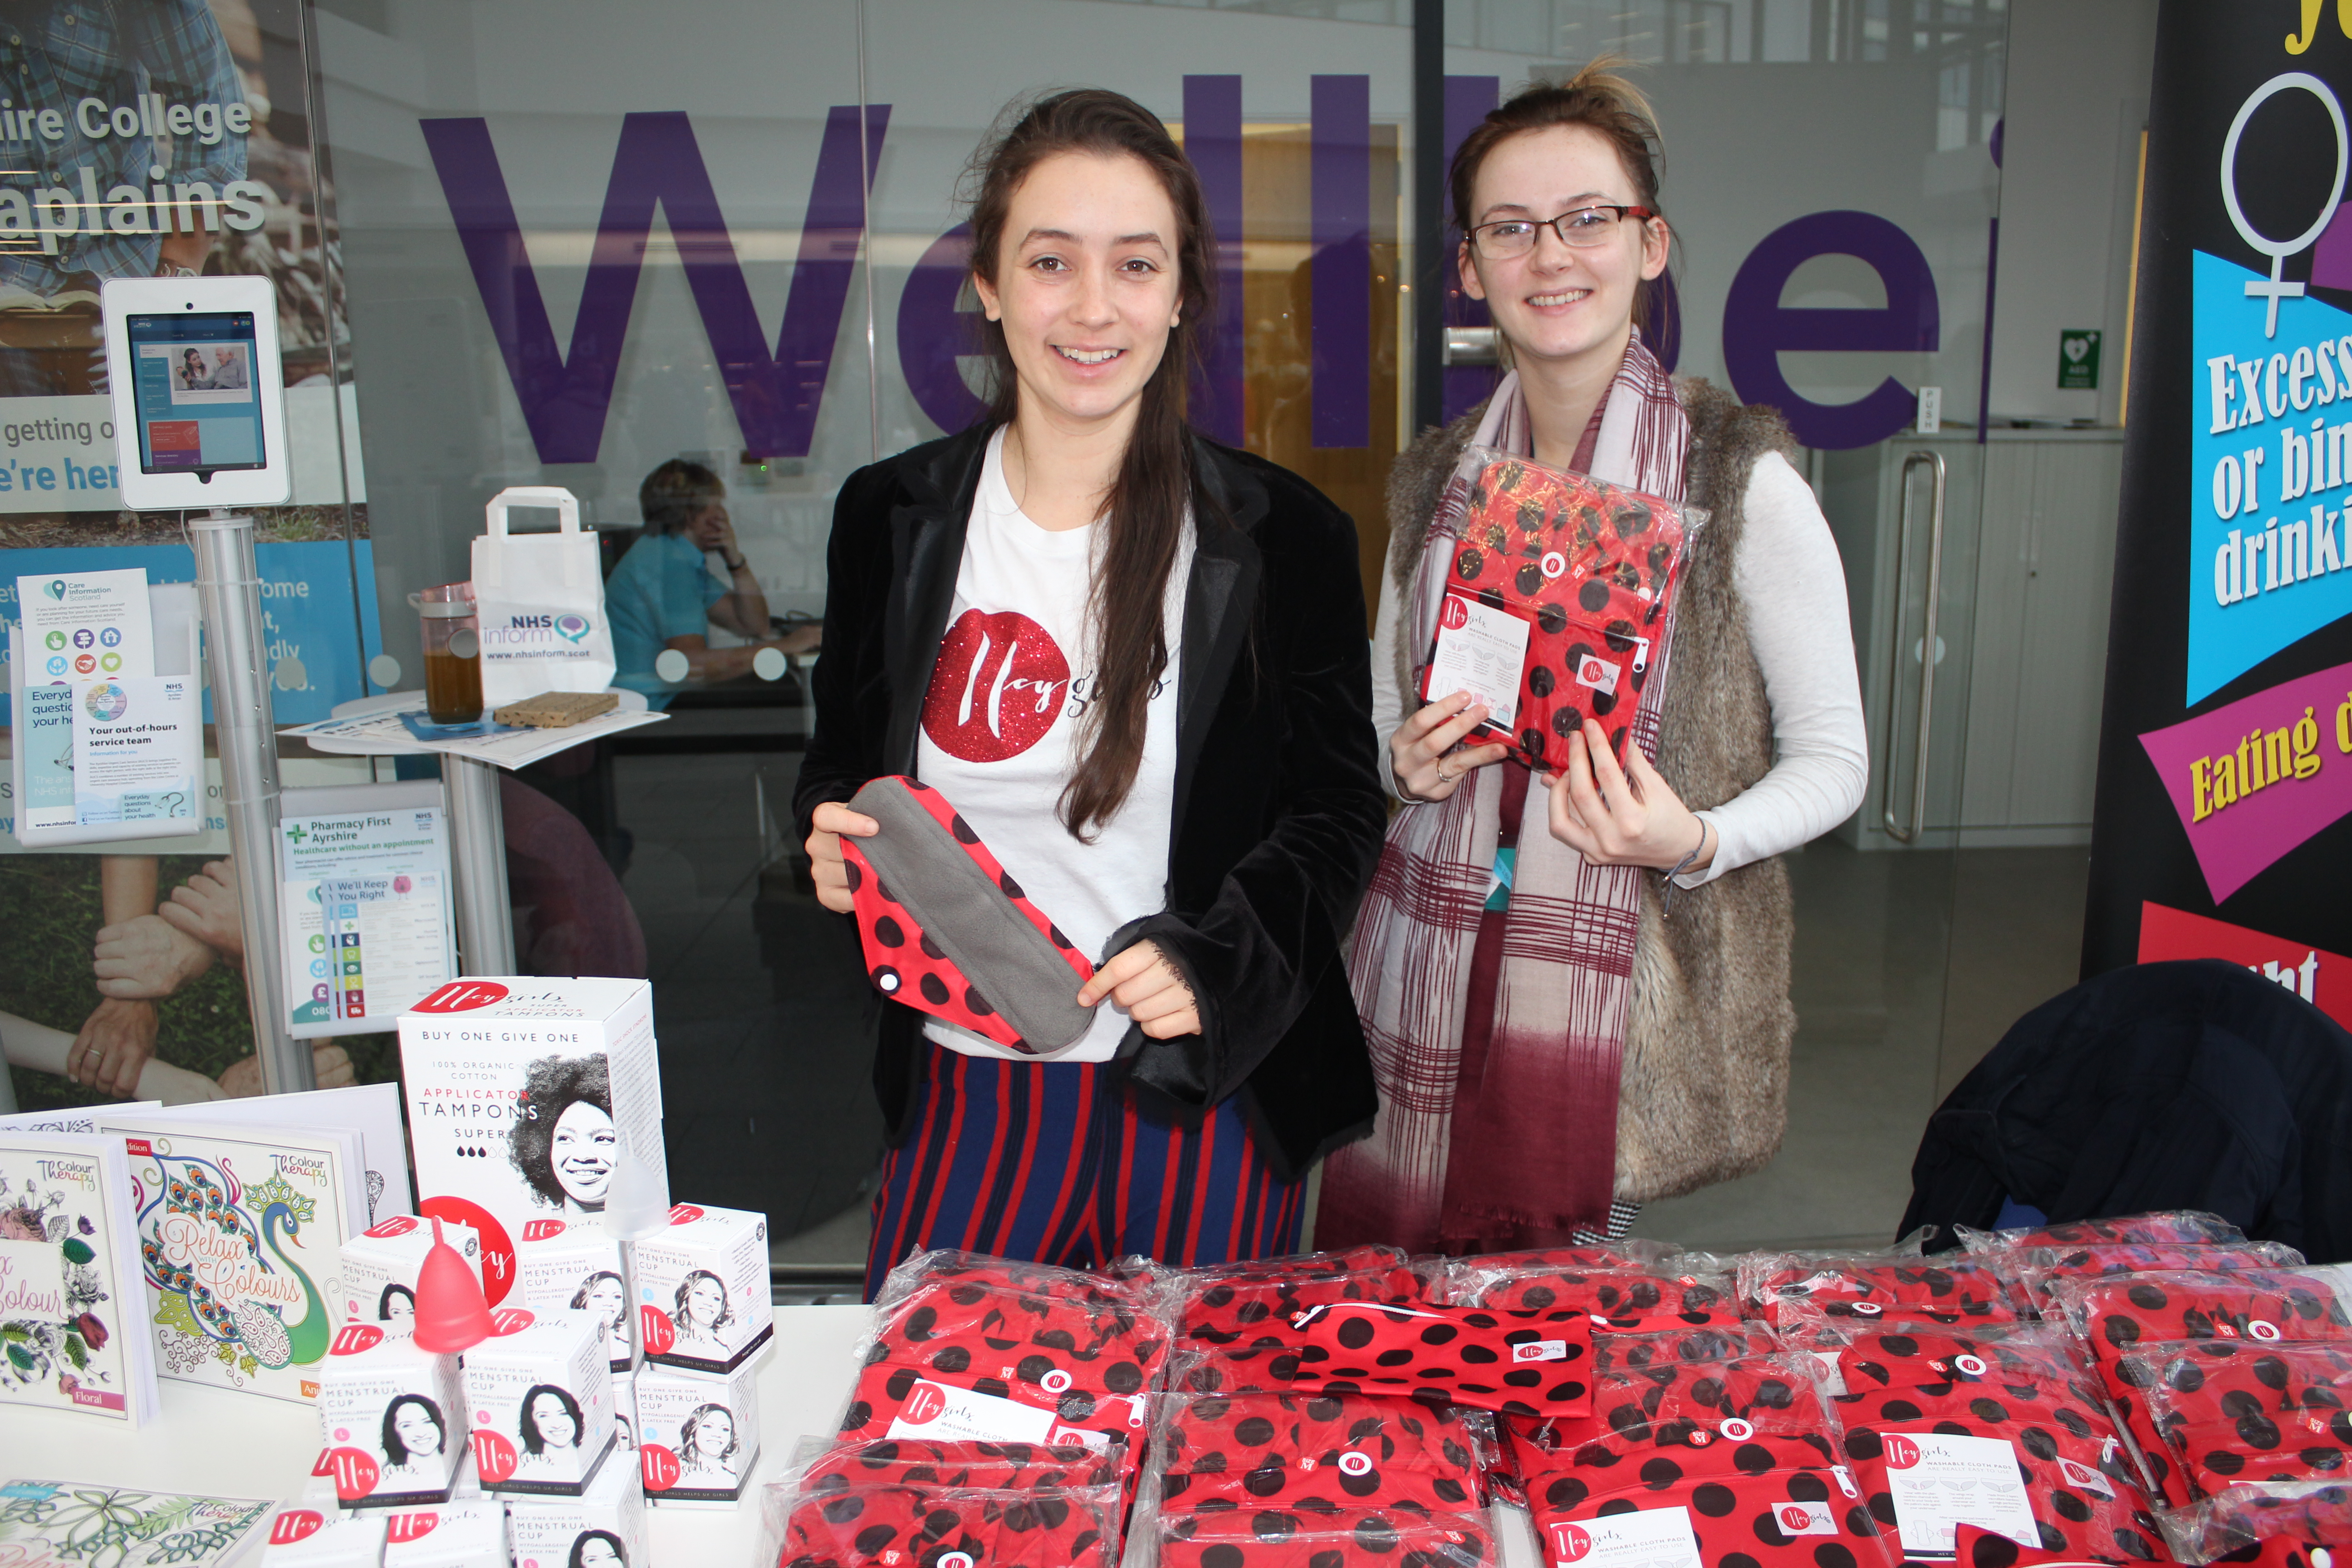 Free sanitary products available to Ayrshire College students